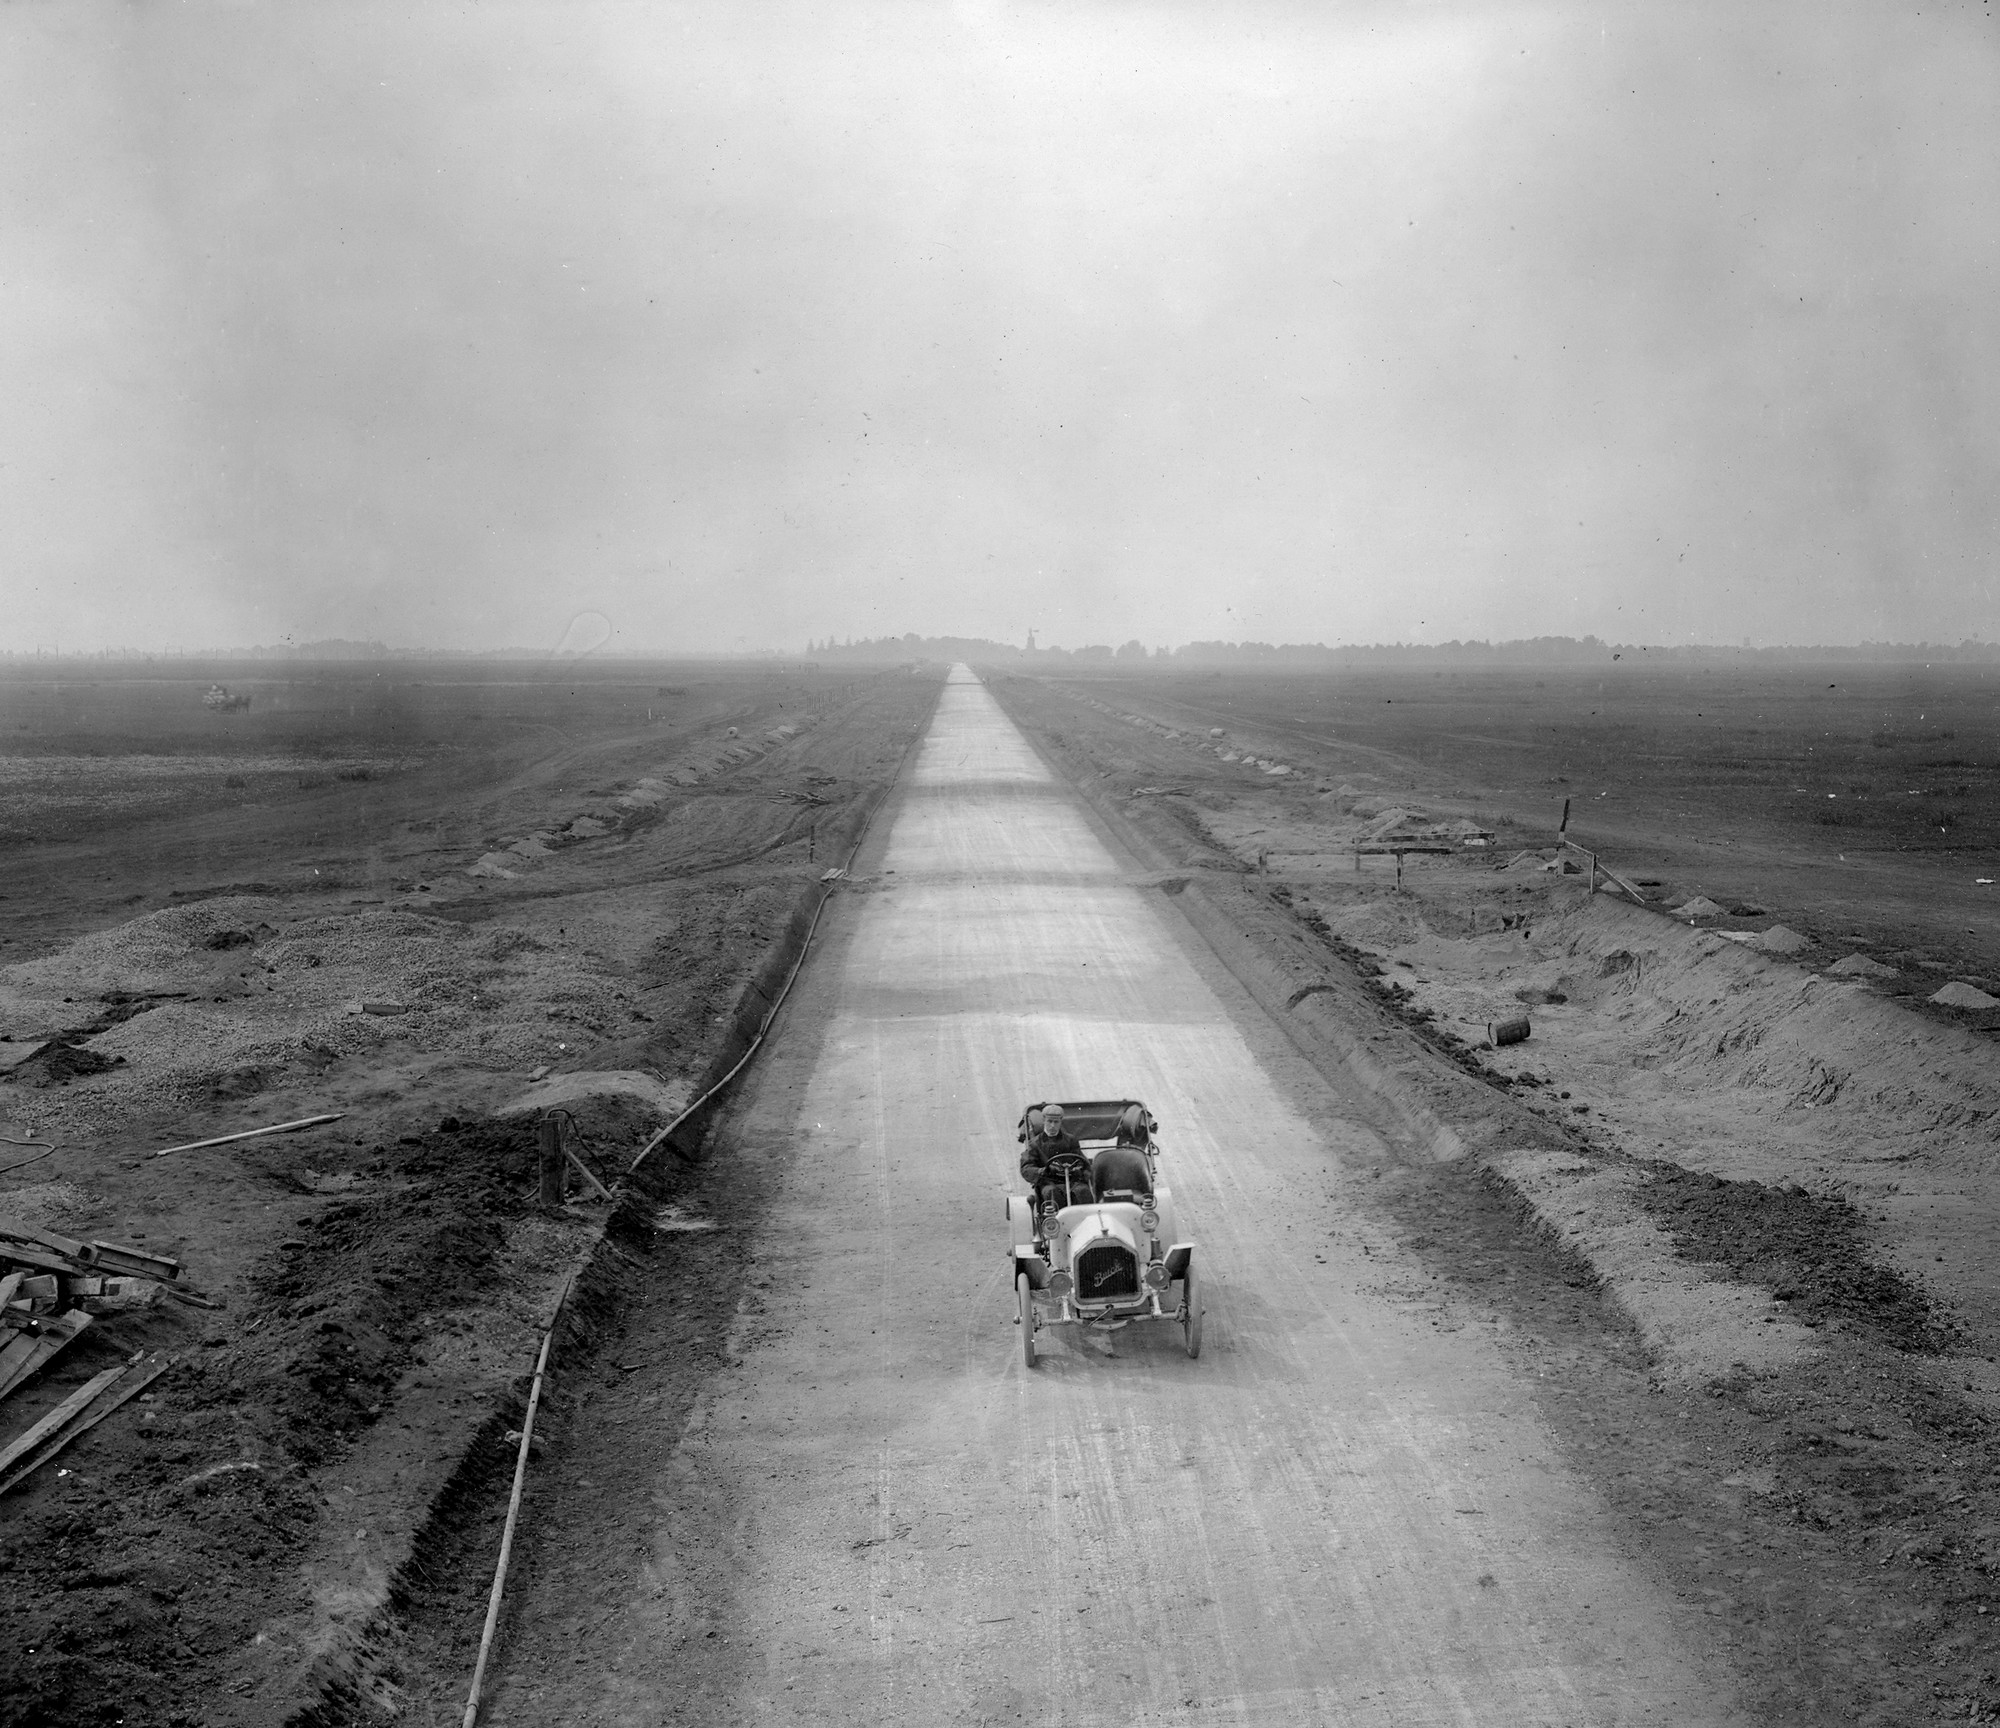 Taken from the former Carman Avenue Bridge in East Meadow in 1908, this photo of the Long Island Motor Parkway appeared on the cover of Kroplick’s book about the historic road.